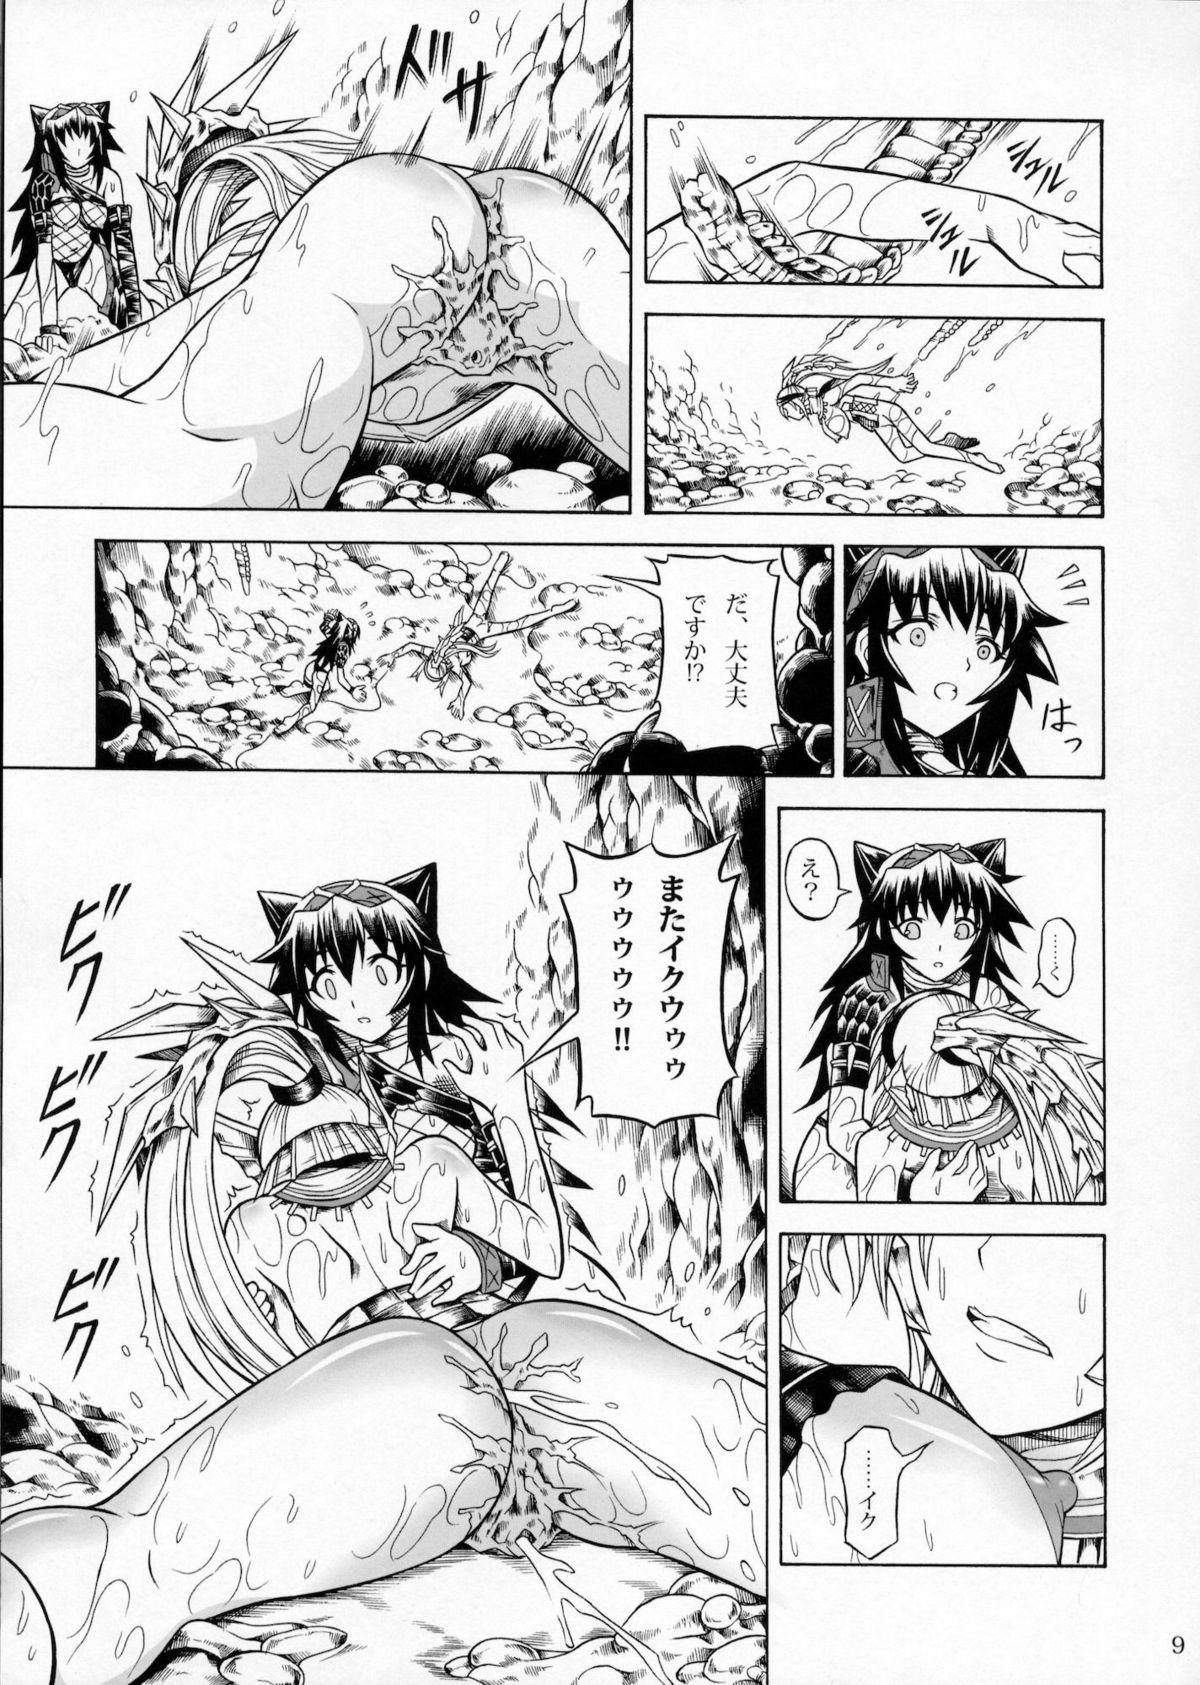 Busty Solo Hunter no Seitai 2 The second part - Monster hunter Room - Page 8